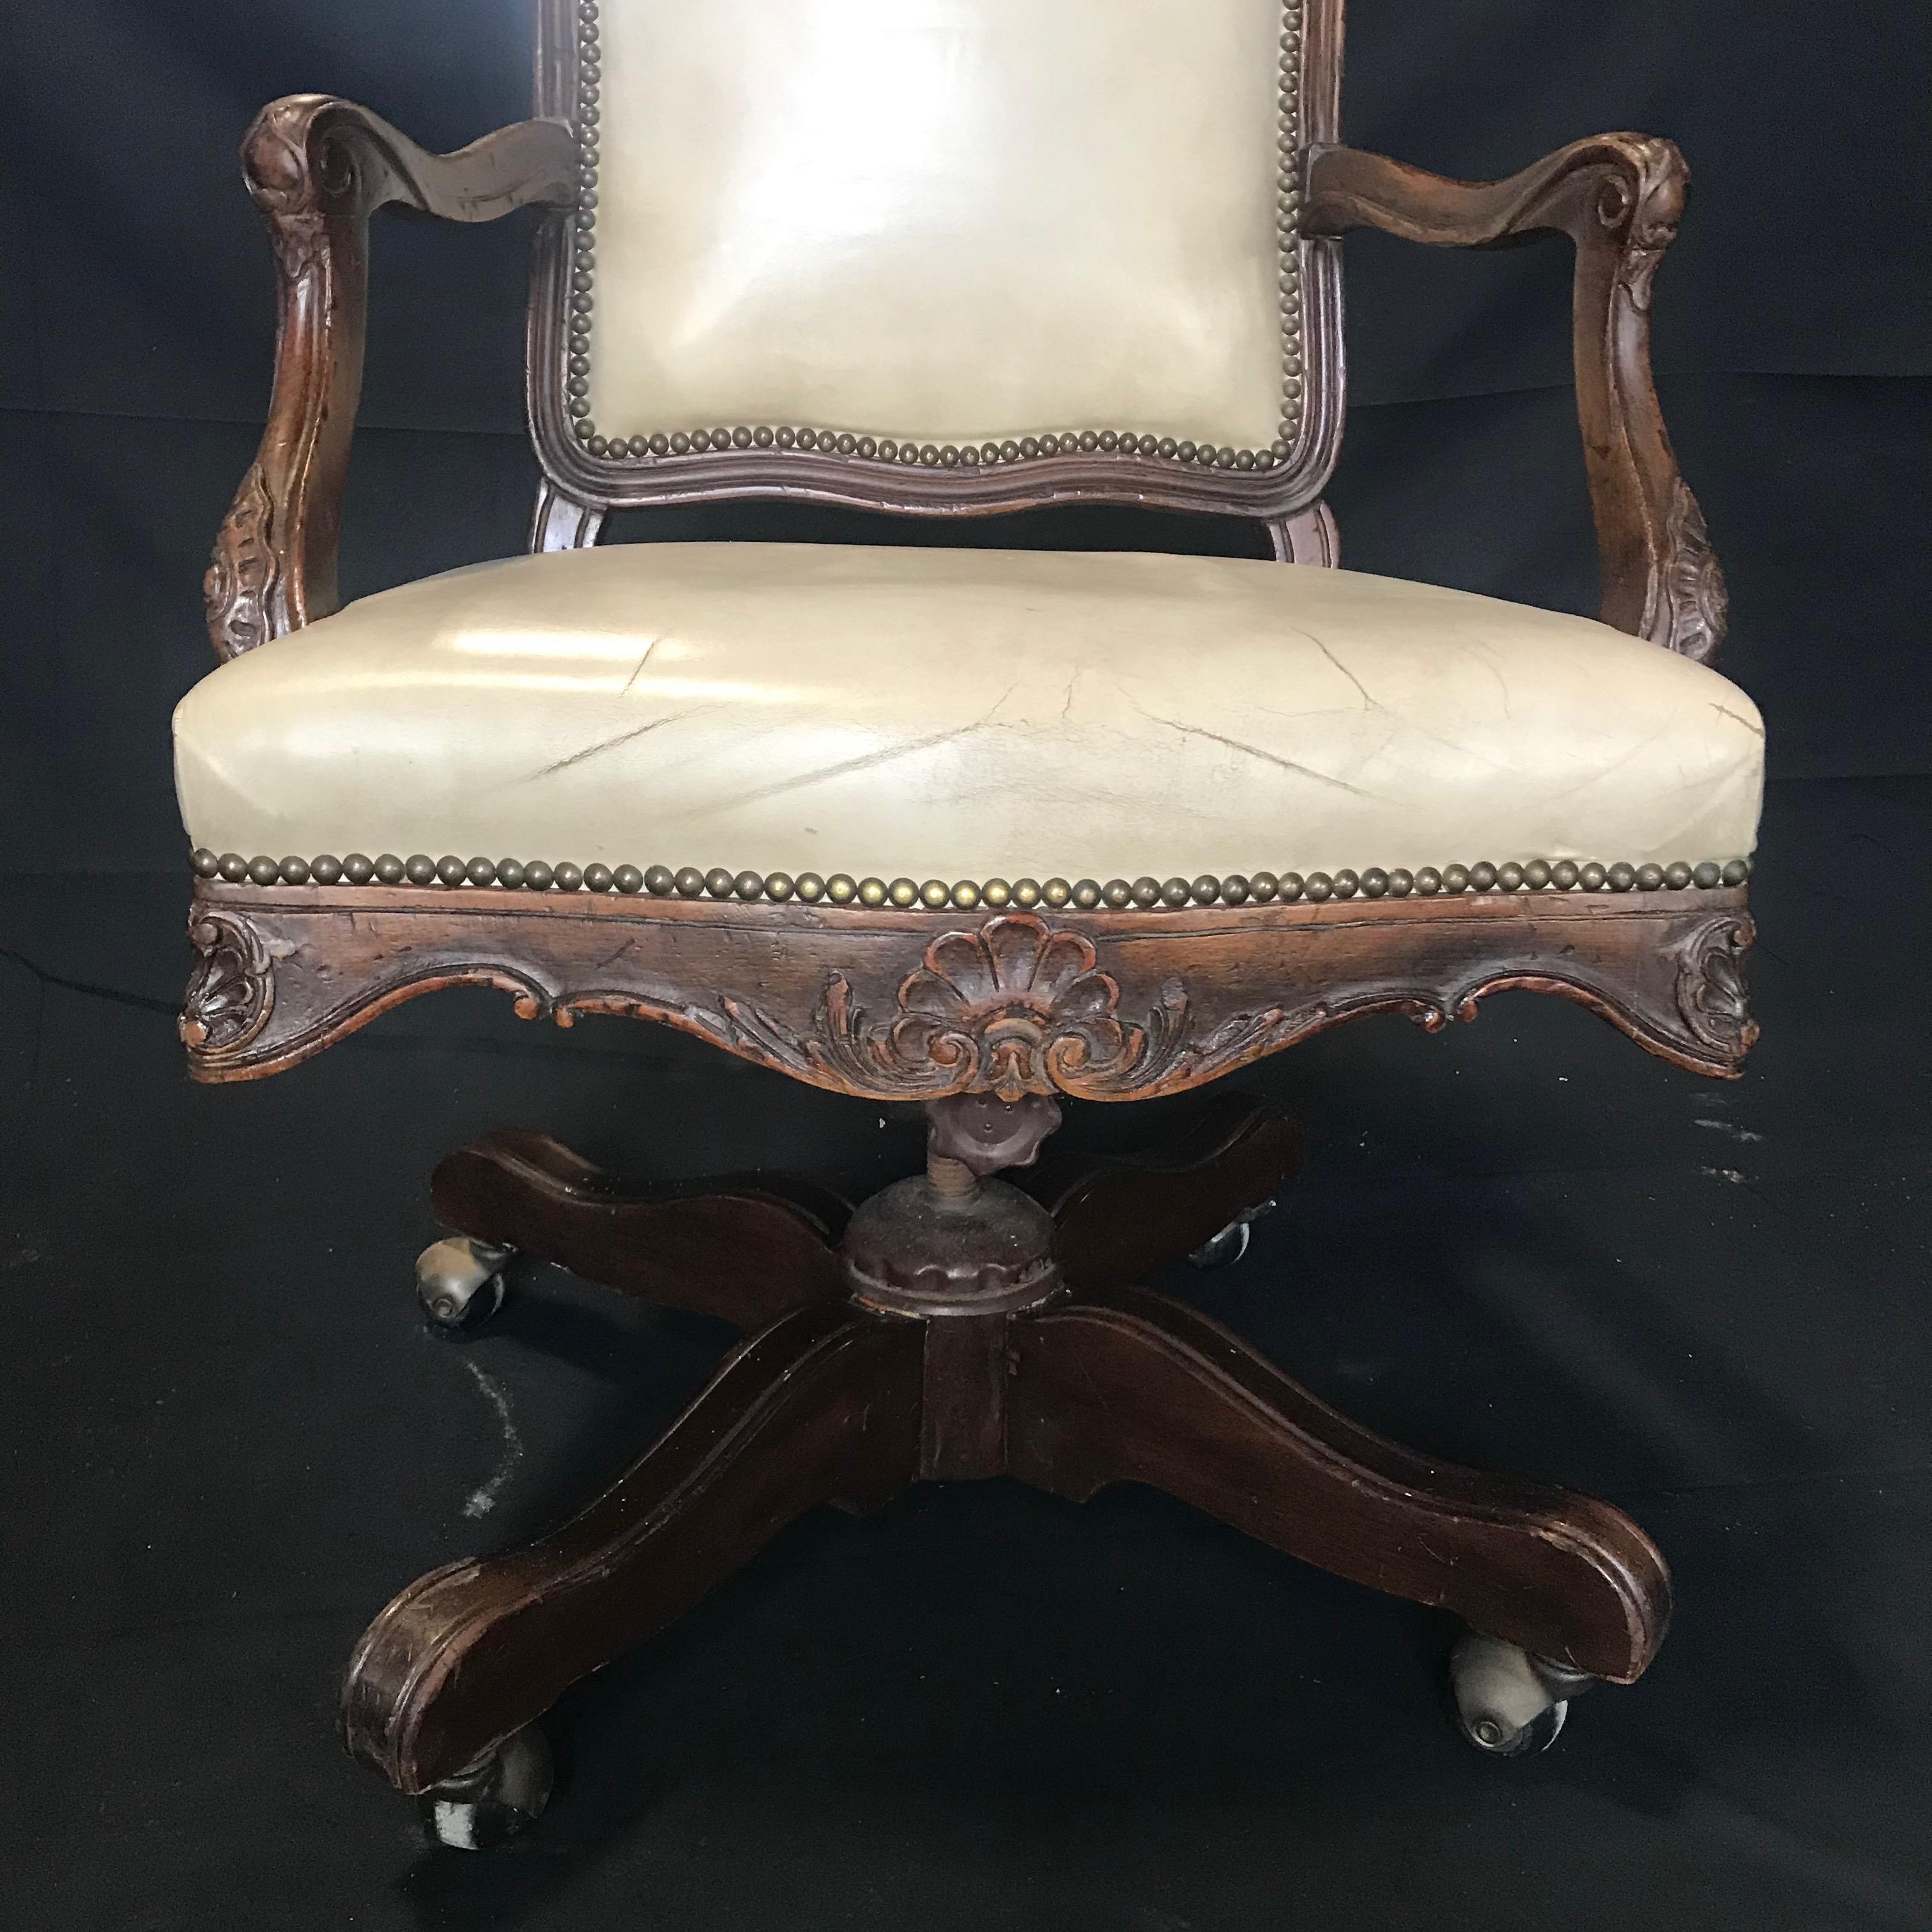 Beautiful early 20th century Louis XV style oak desk chair with ivory leather. Great shape and on casters. Spins!
 
Measures: H seat 18.5”
H arm 27”
#2012.